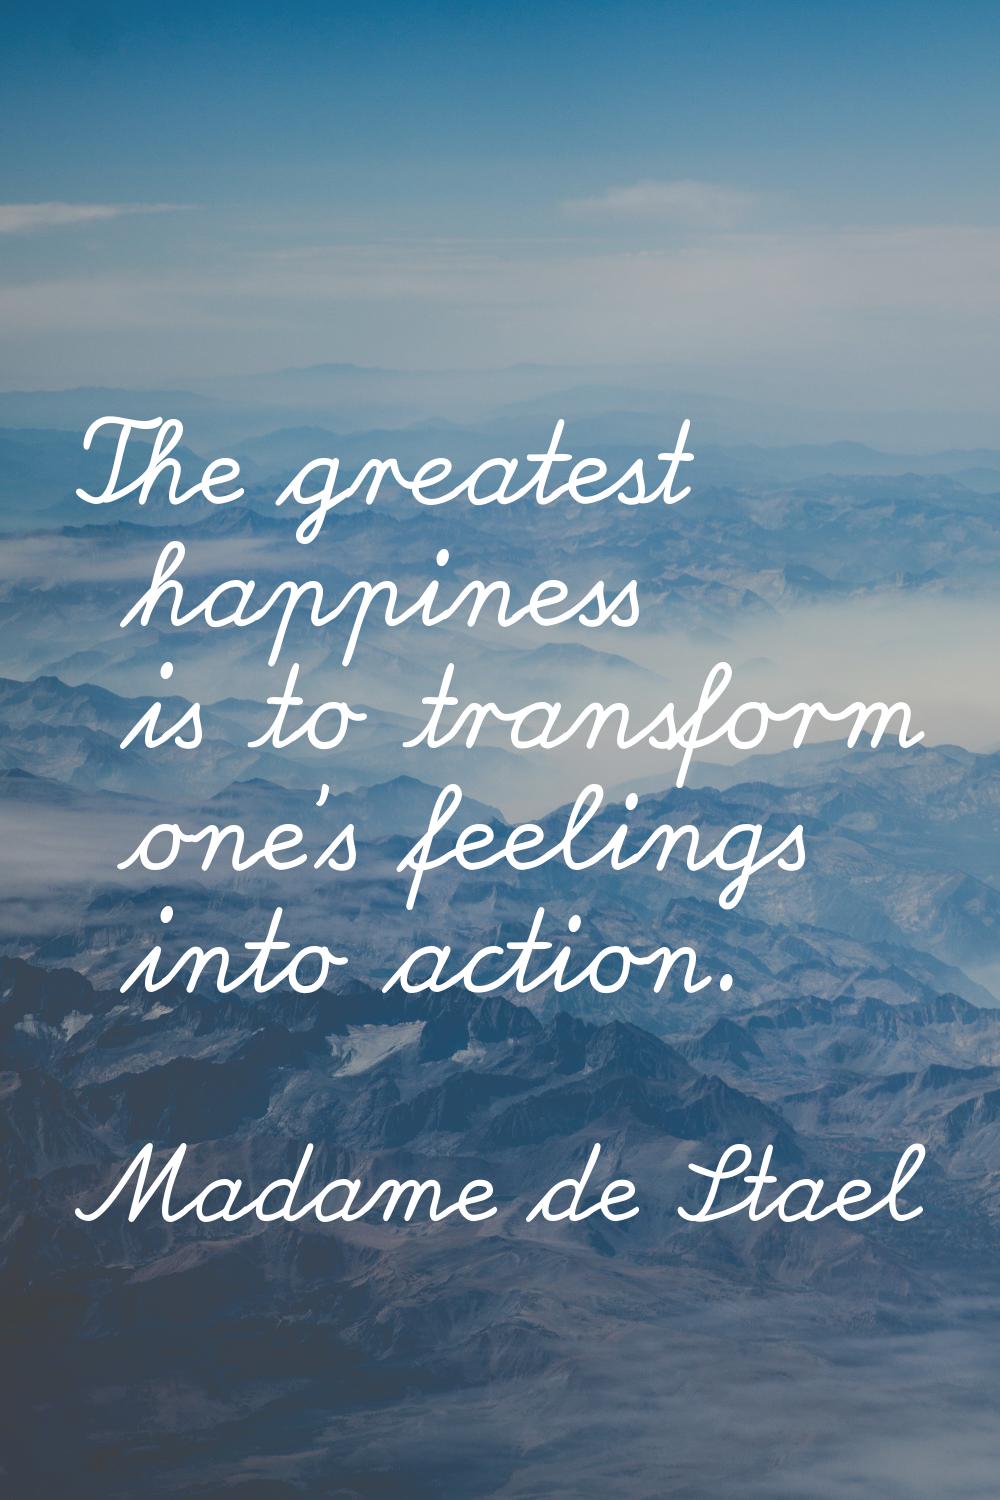 The greatest happiness is to transform one's feelings into action.